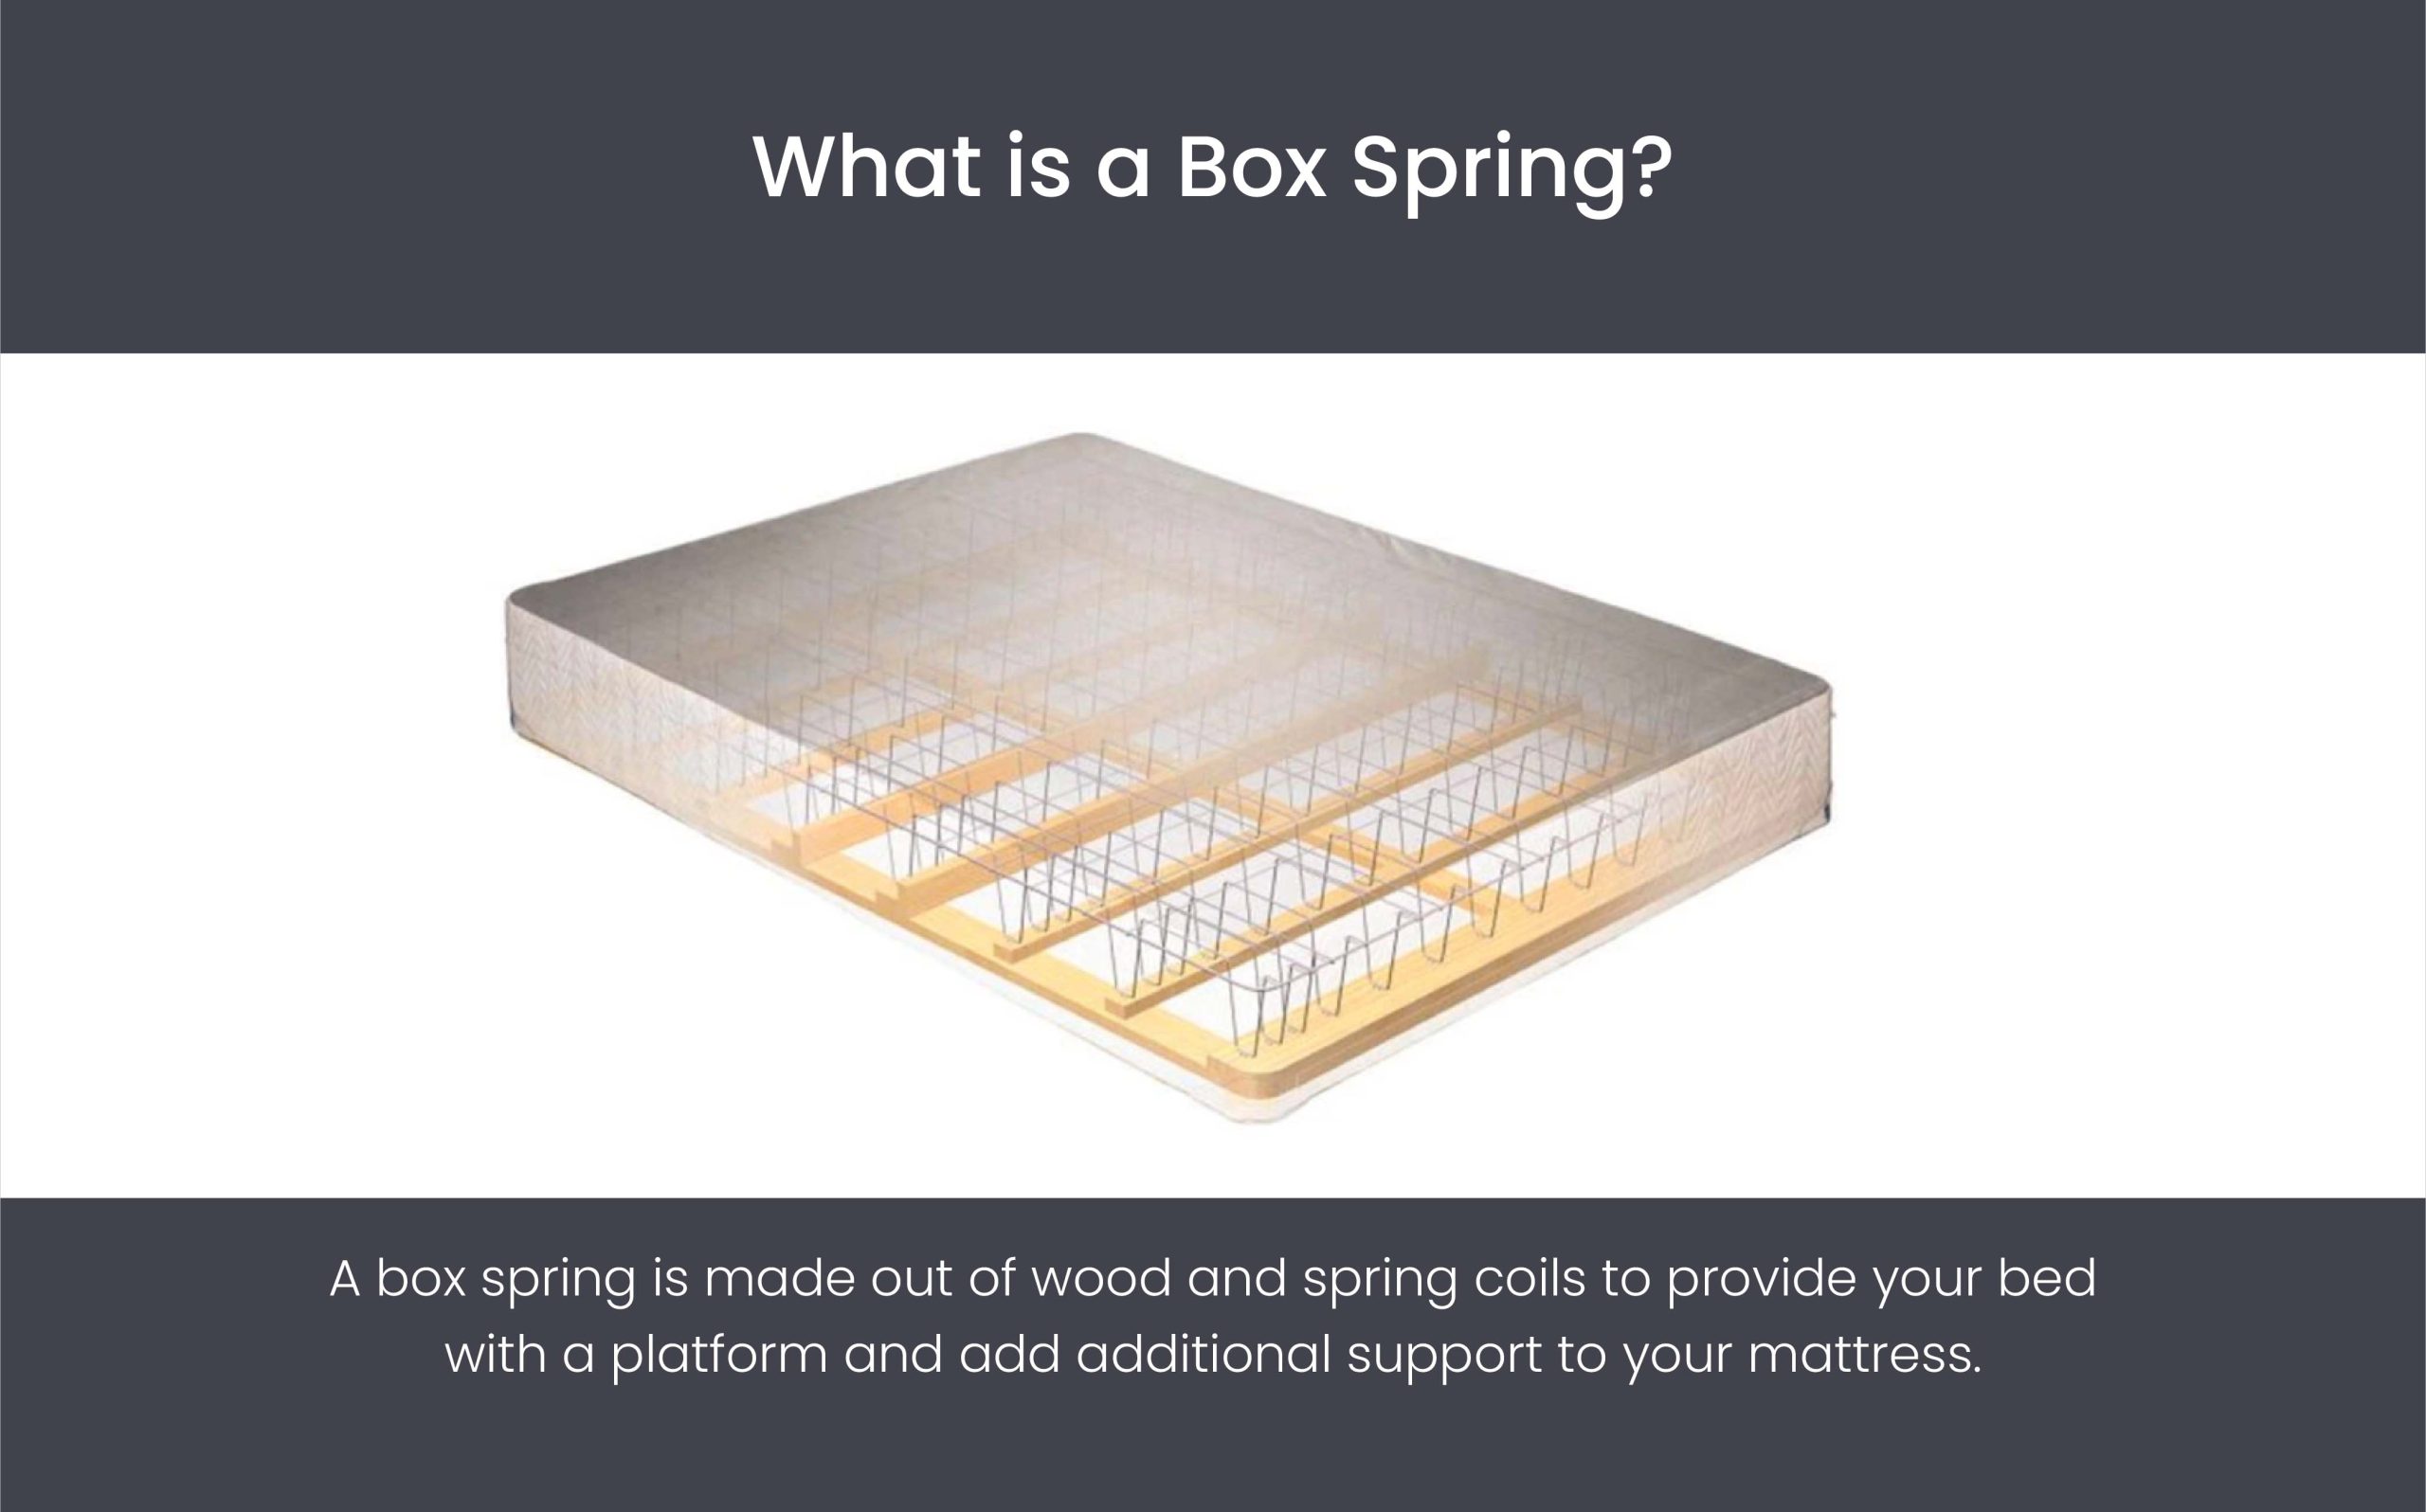 A box spring is mad out of wood and spring coils to provide your bed with a platform and additional support to your mattress.